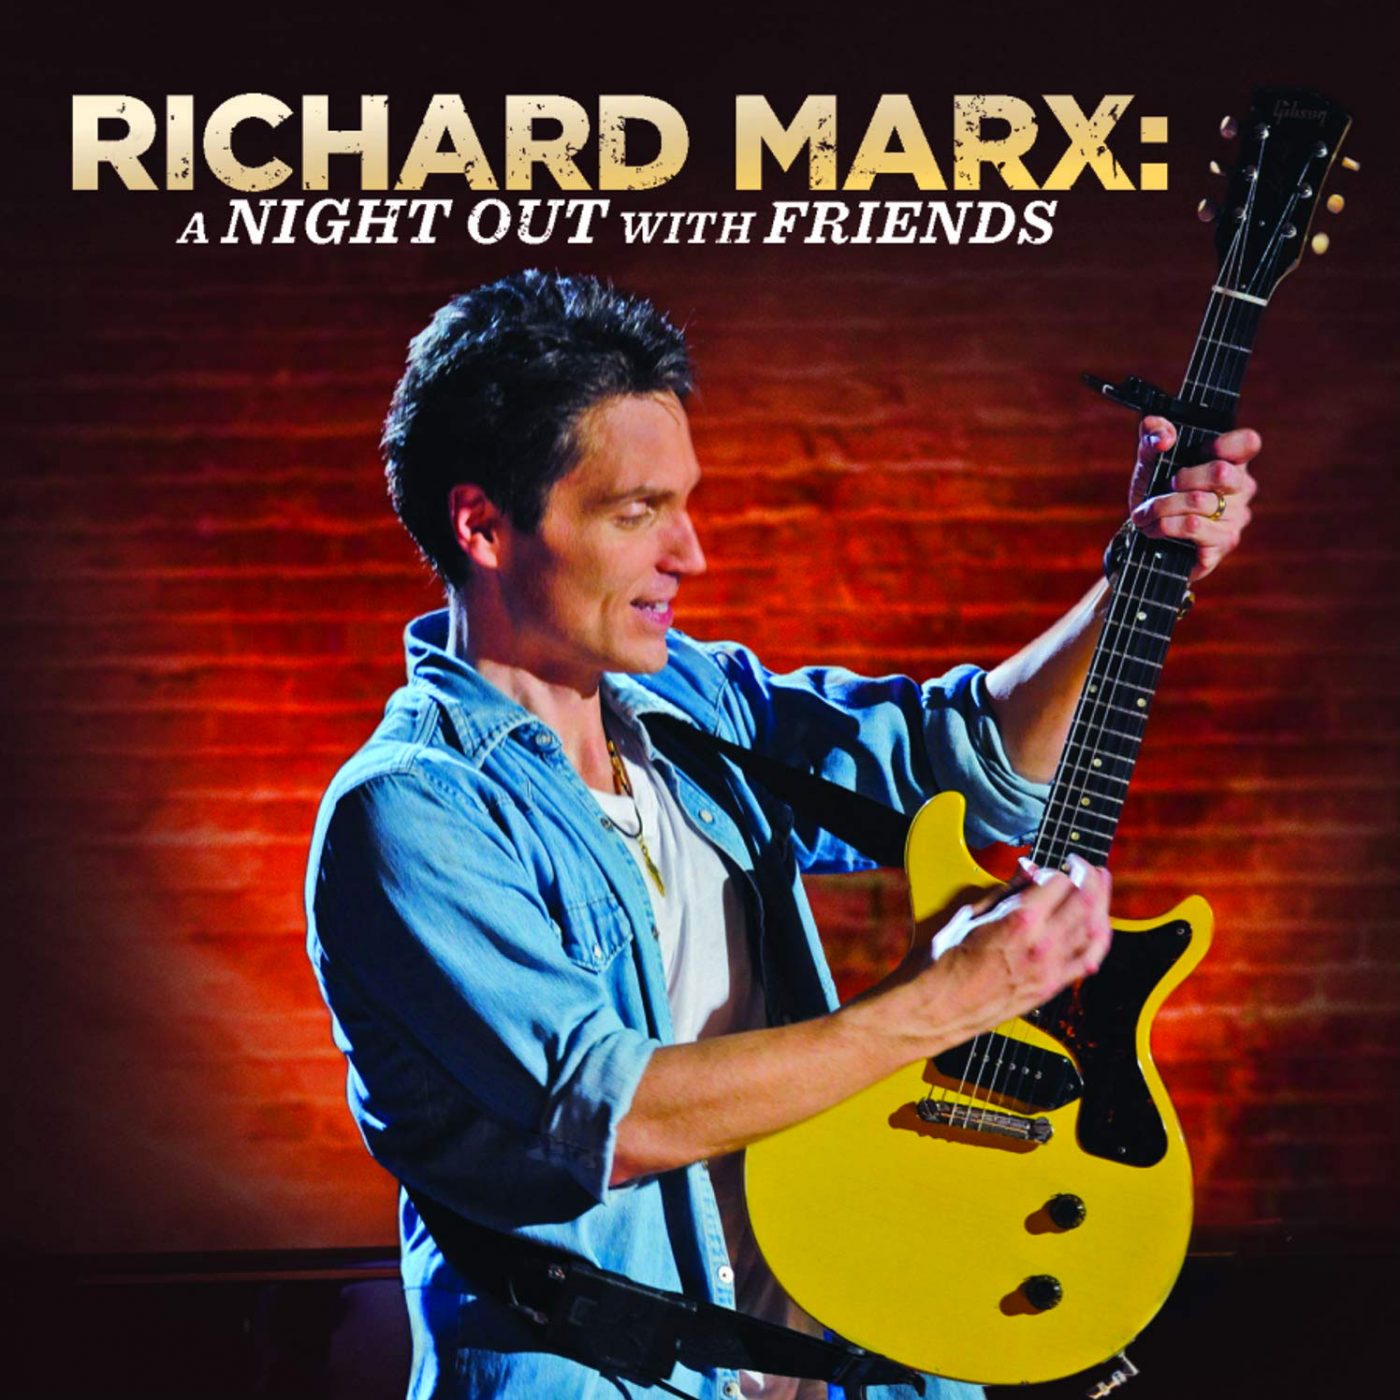 Richard Marx - A Night Out With Friends (Live)